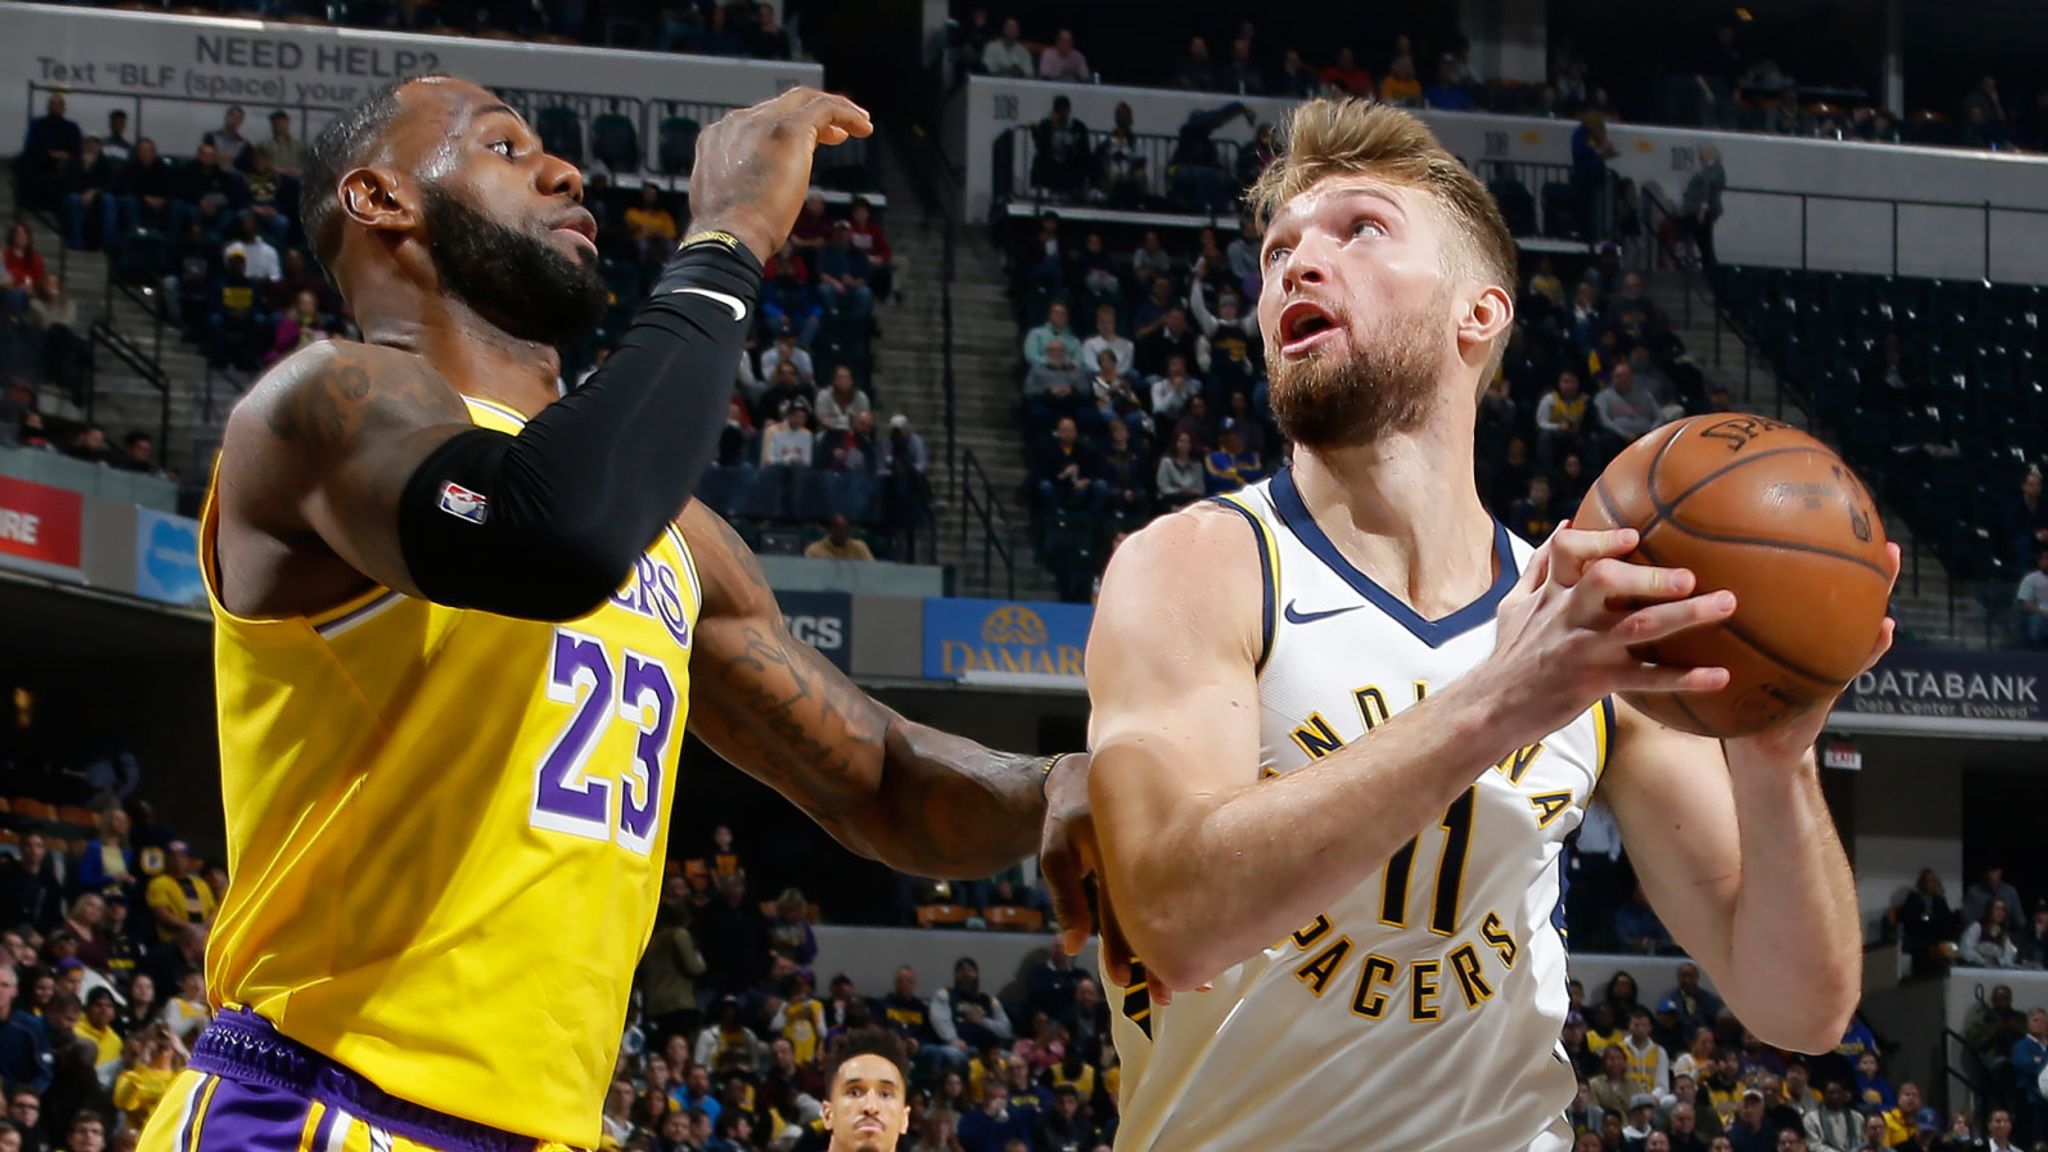 Indiana Pacers center Domantas Sabonis to miss time with an ankle